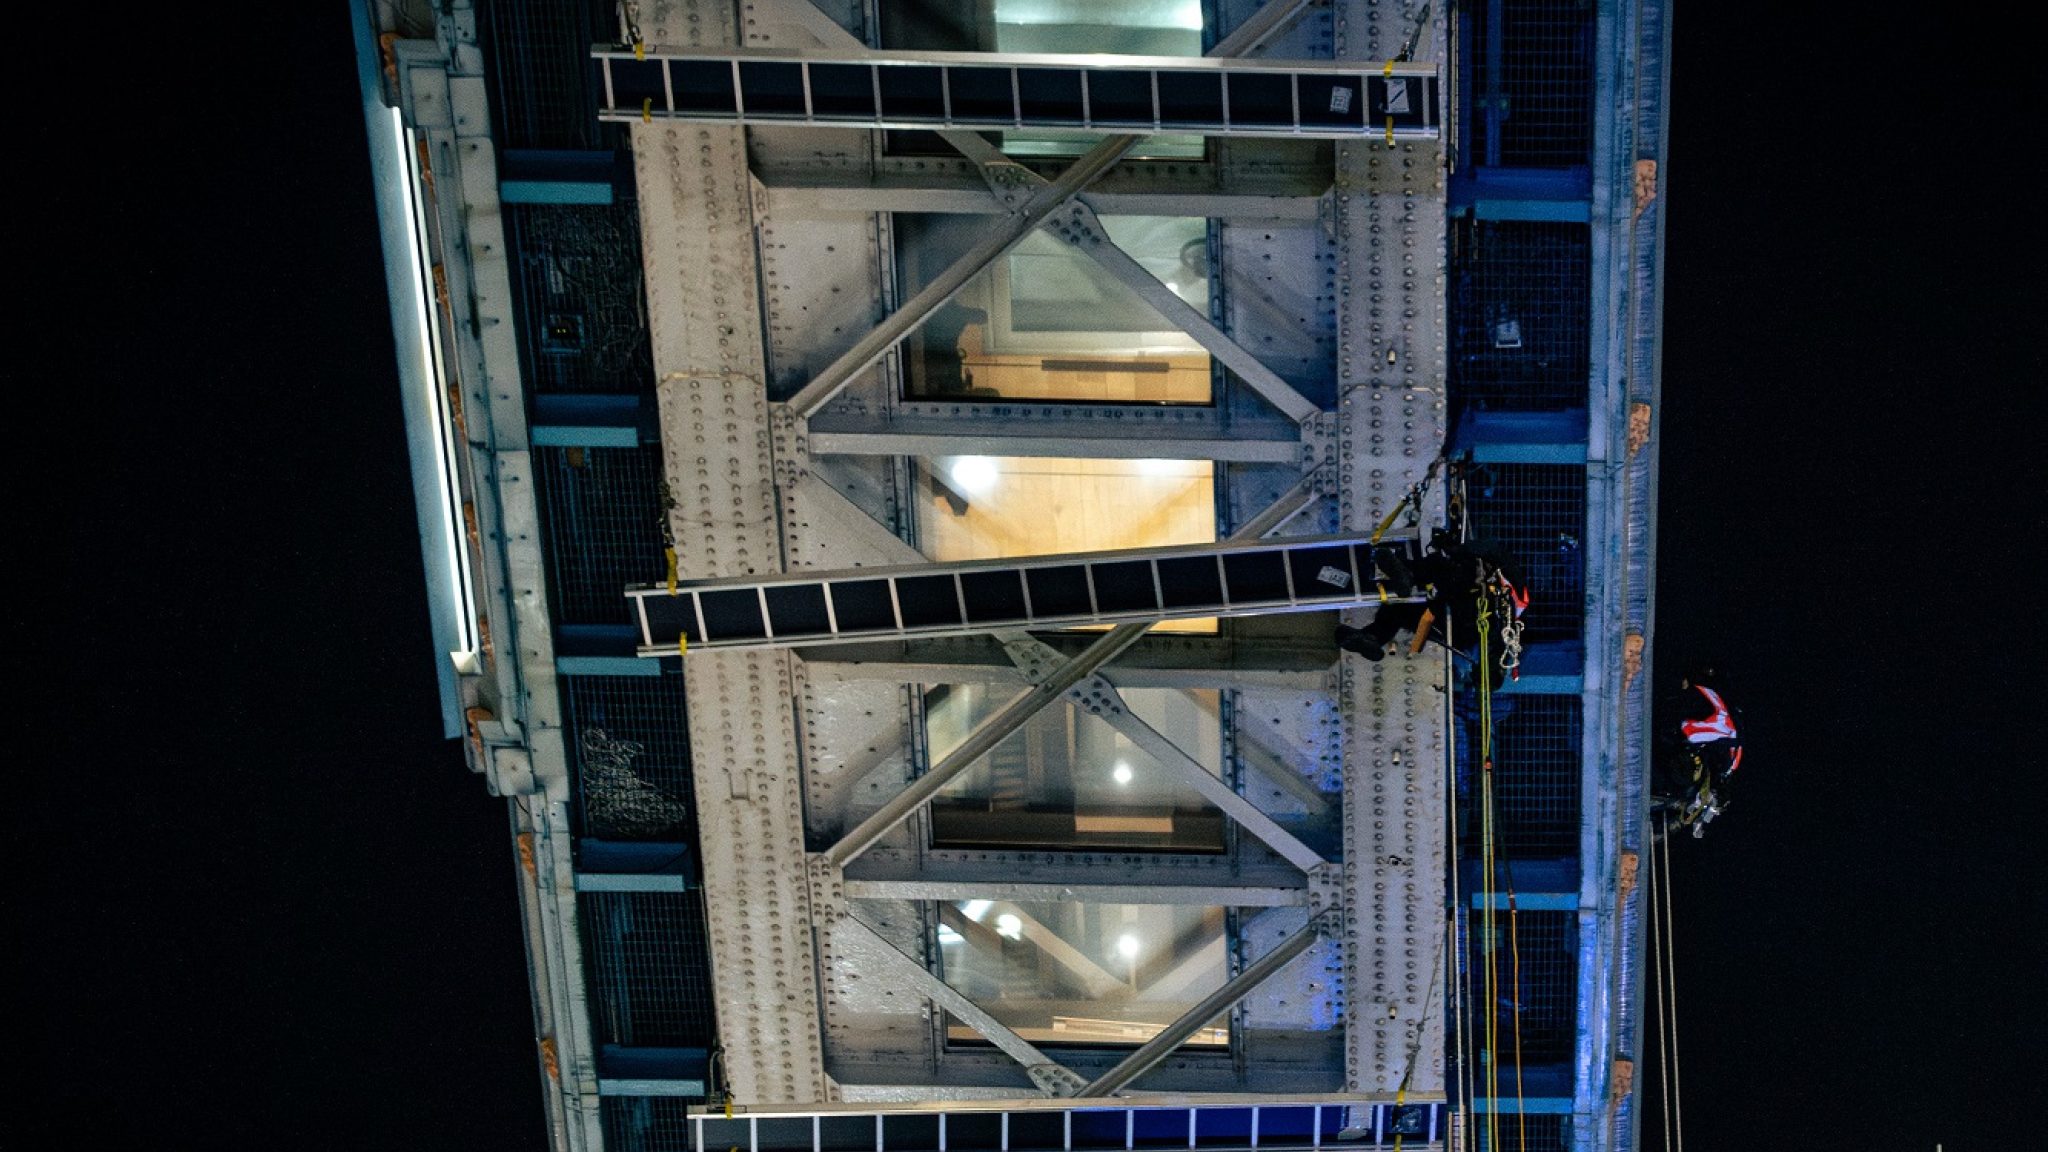 Abseiling workers suspended from the underside of the high-level walkways at Tower Bridge cleaning the glass floors